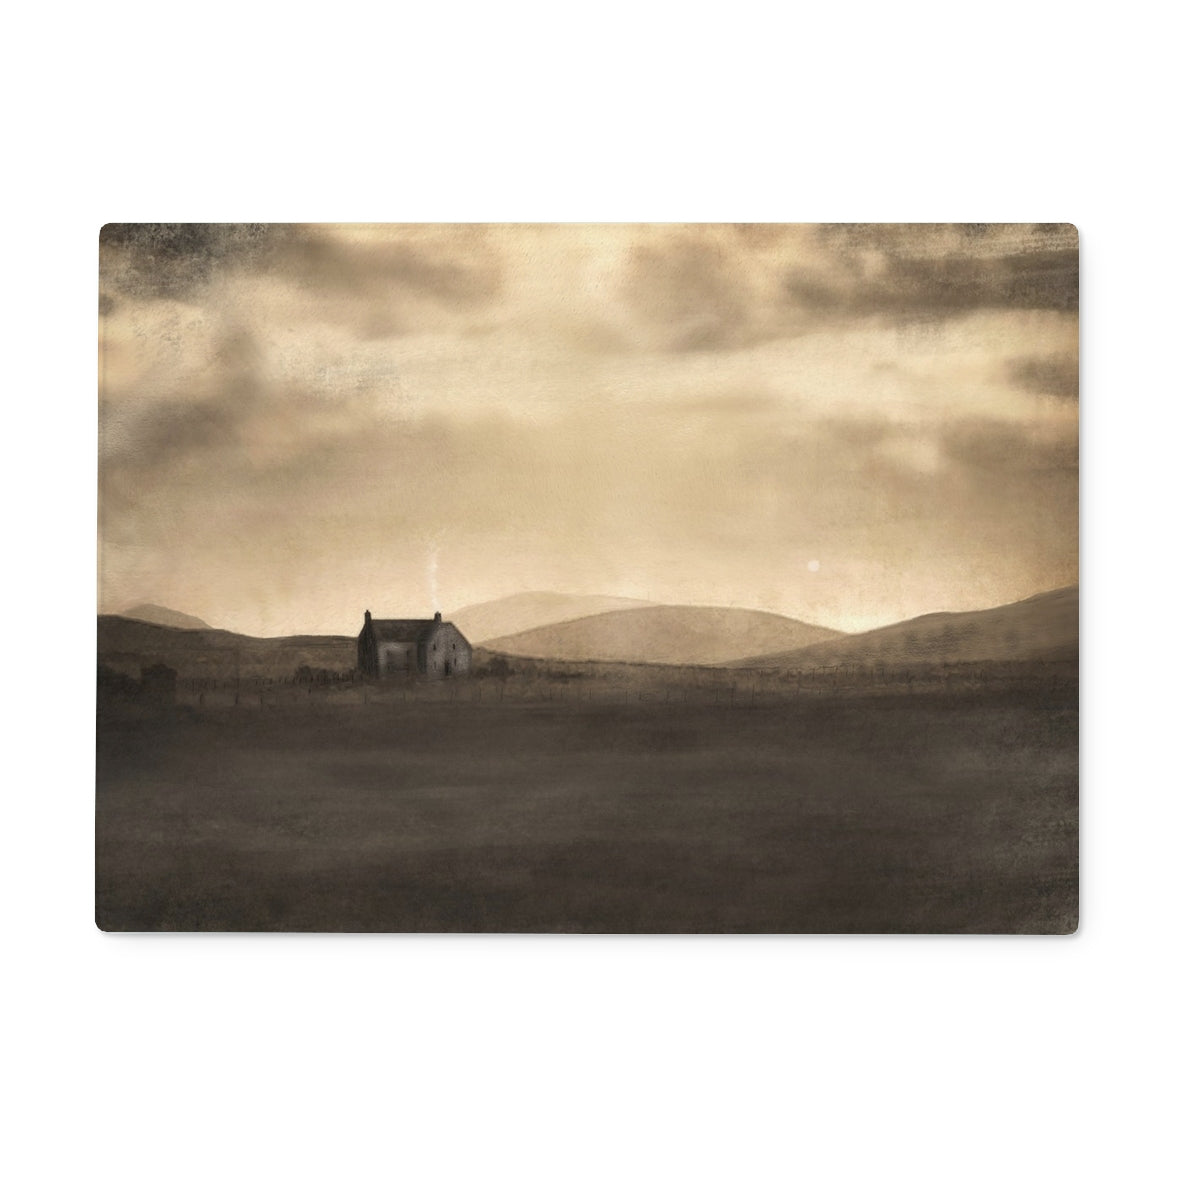 A Moonlit Croft Art Gifts Glass Chopping Board-Glass Chopping Boards-Hebridean Islands Art Gallery-15"x11" Rectangular-Paintings, Prints, Homeware, Art Gifts From Scotland By Scottish Artist Kevin Hunter